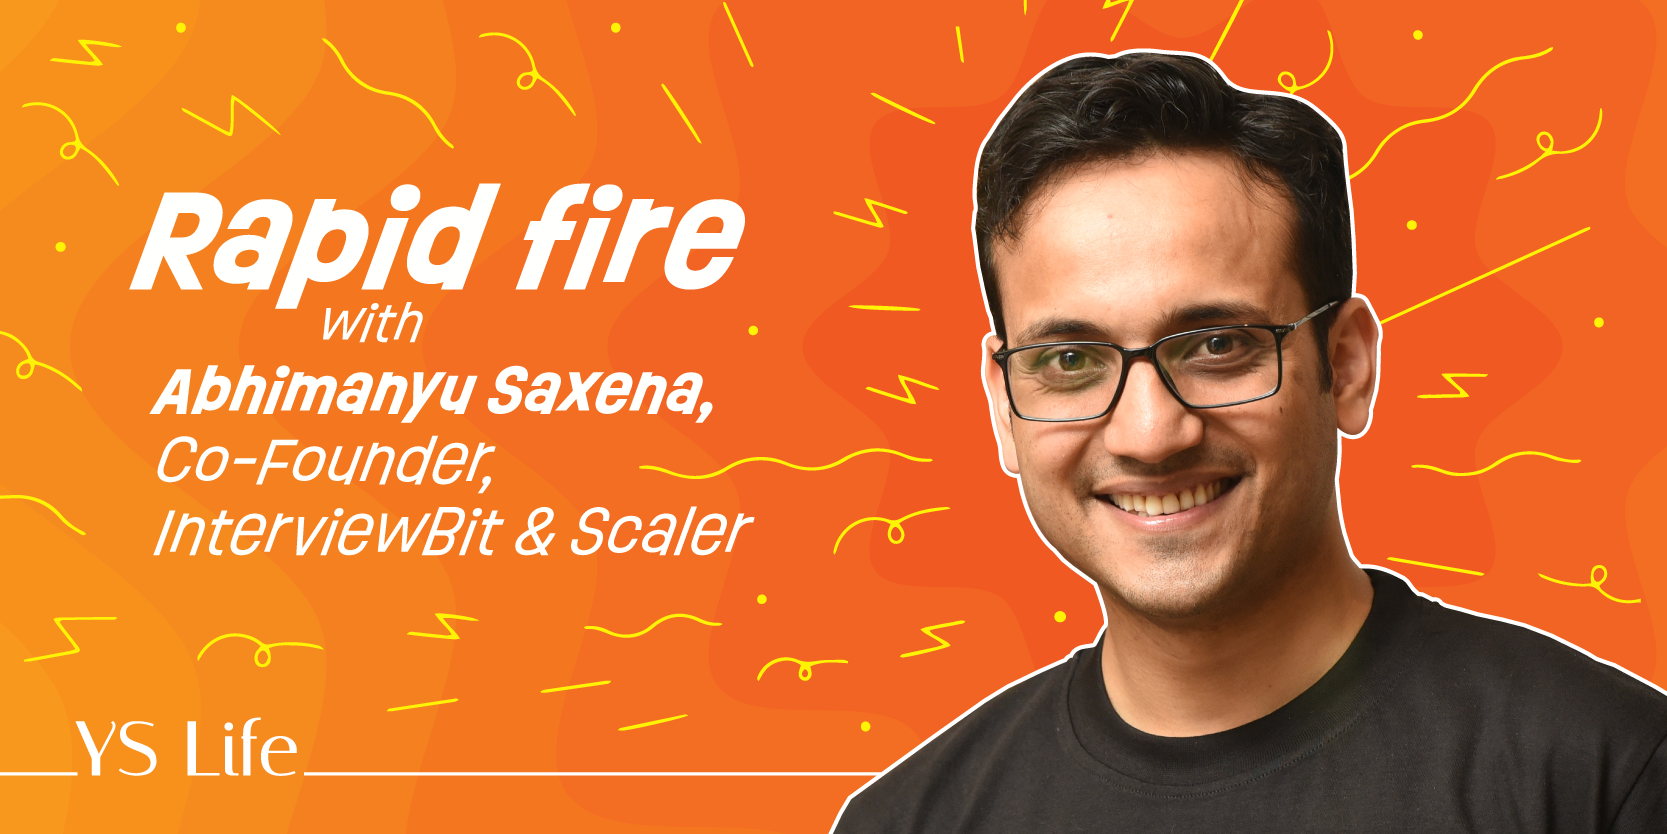 Rapid fire with Abhimanyu Saxena, Co-founder of InterviewBit and Scaler 